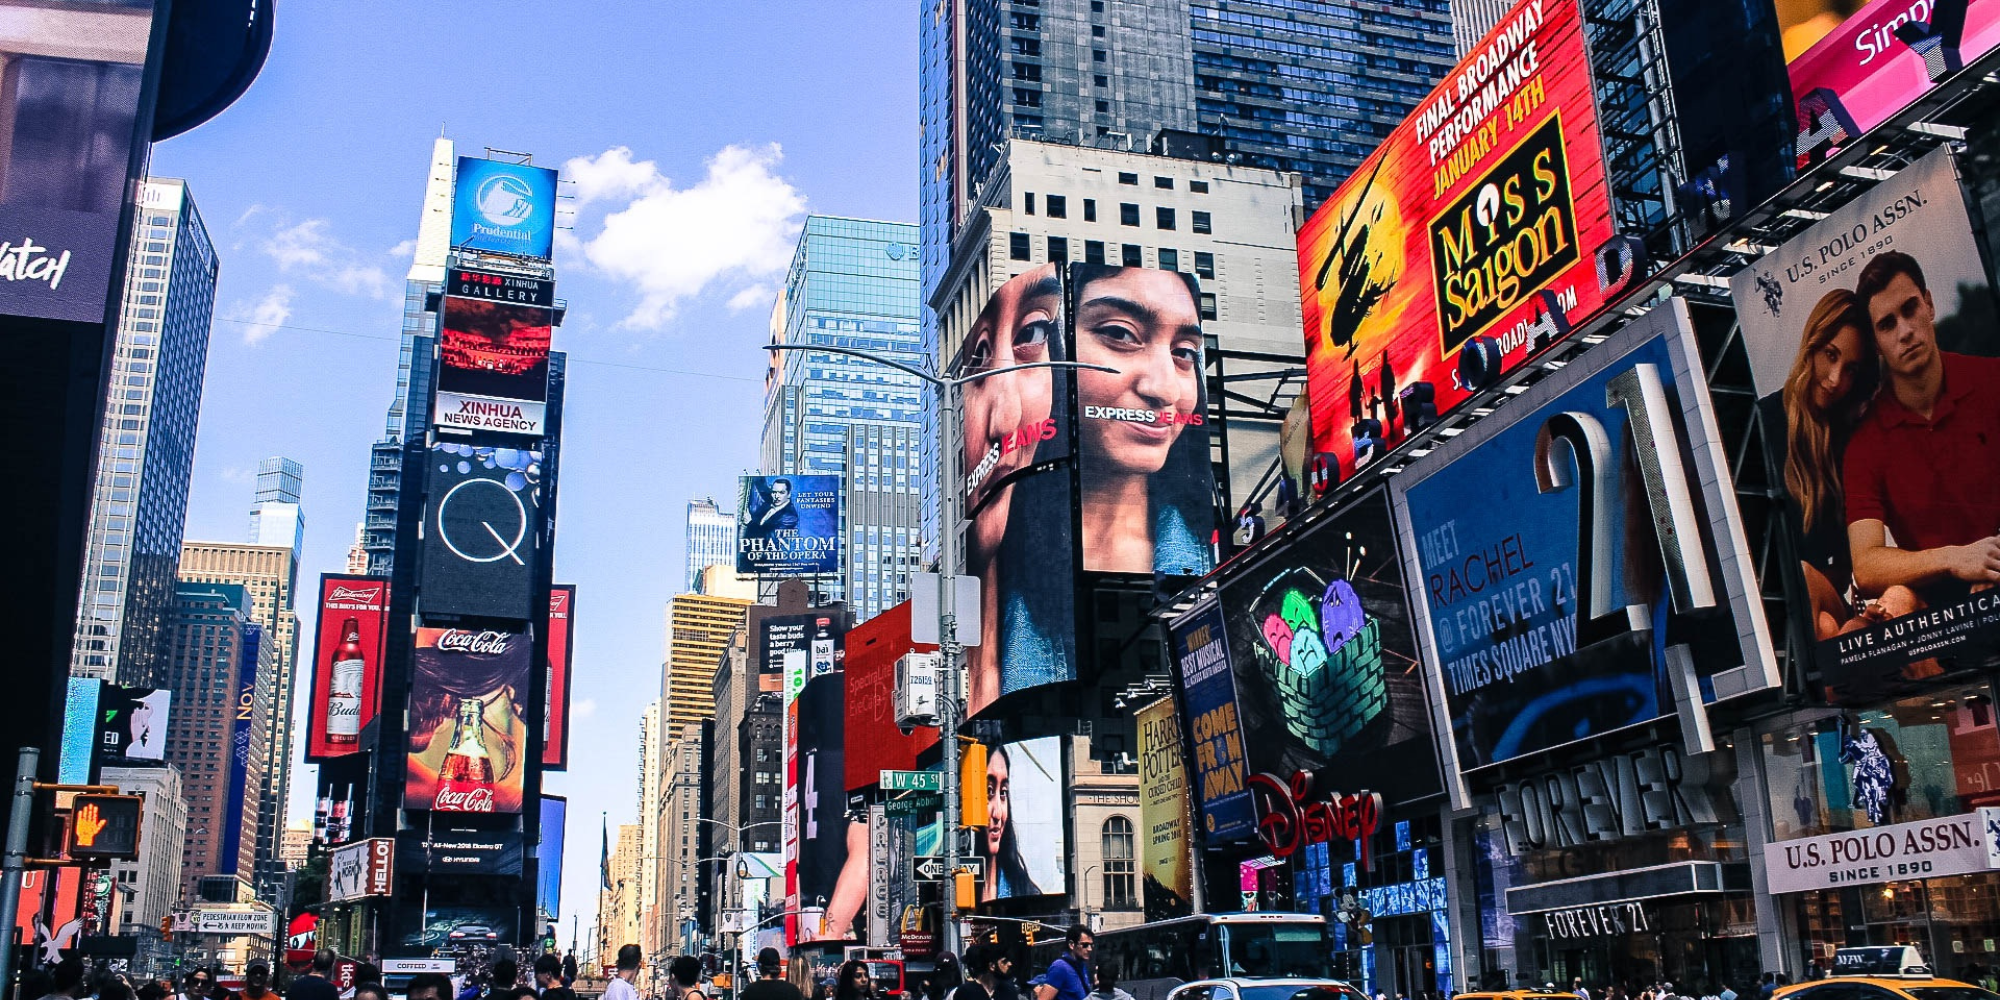 Digital Signage Basics: The Ultimate Guide to Digital Signage as a Medium, Tool, and Business